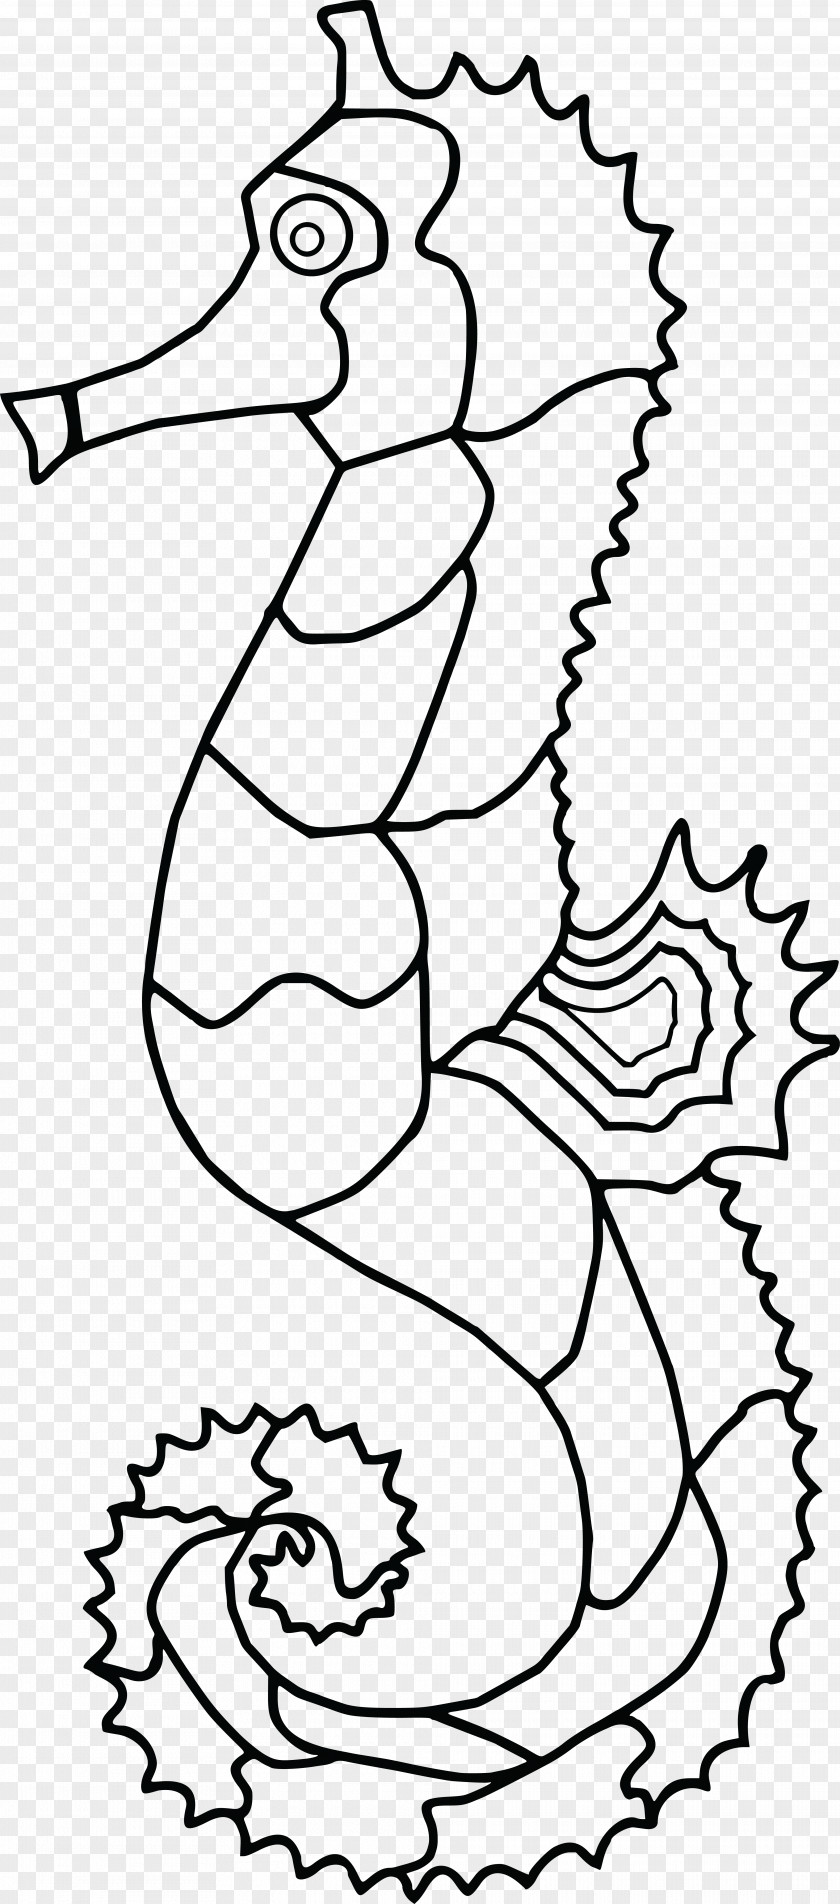 Seahorse Line Art Drawing Coloring Book Animal PNG